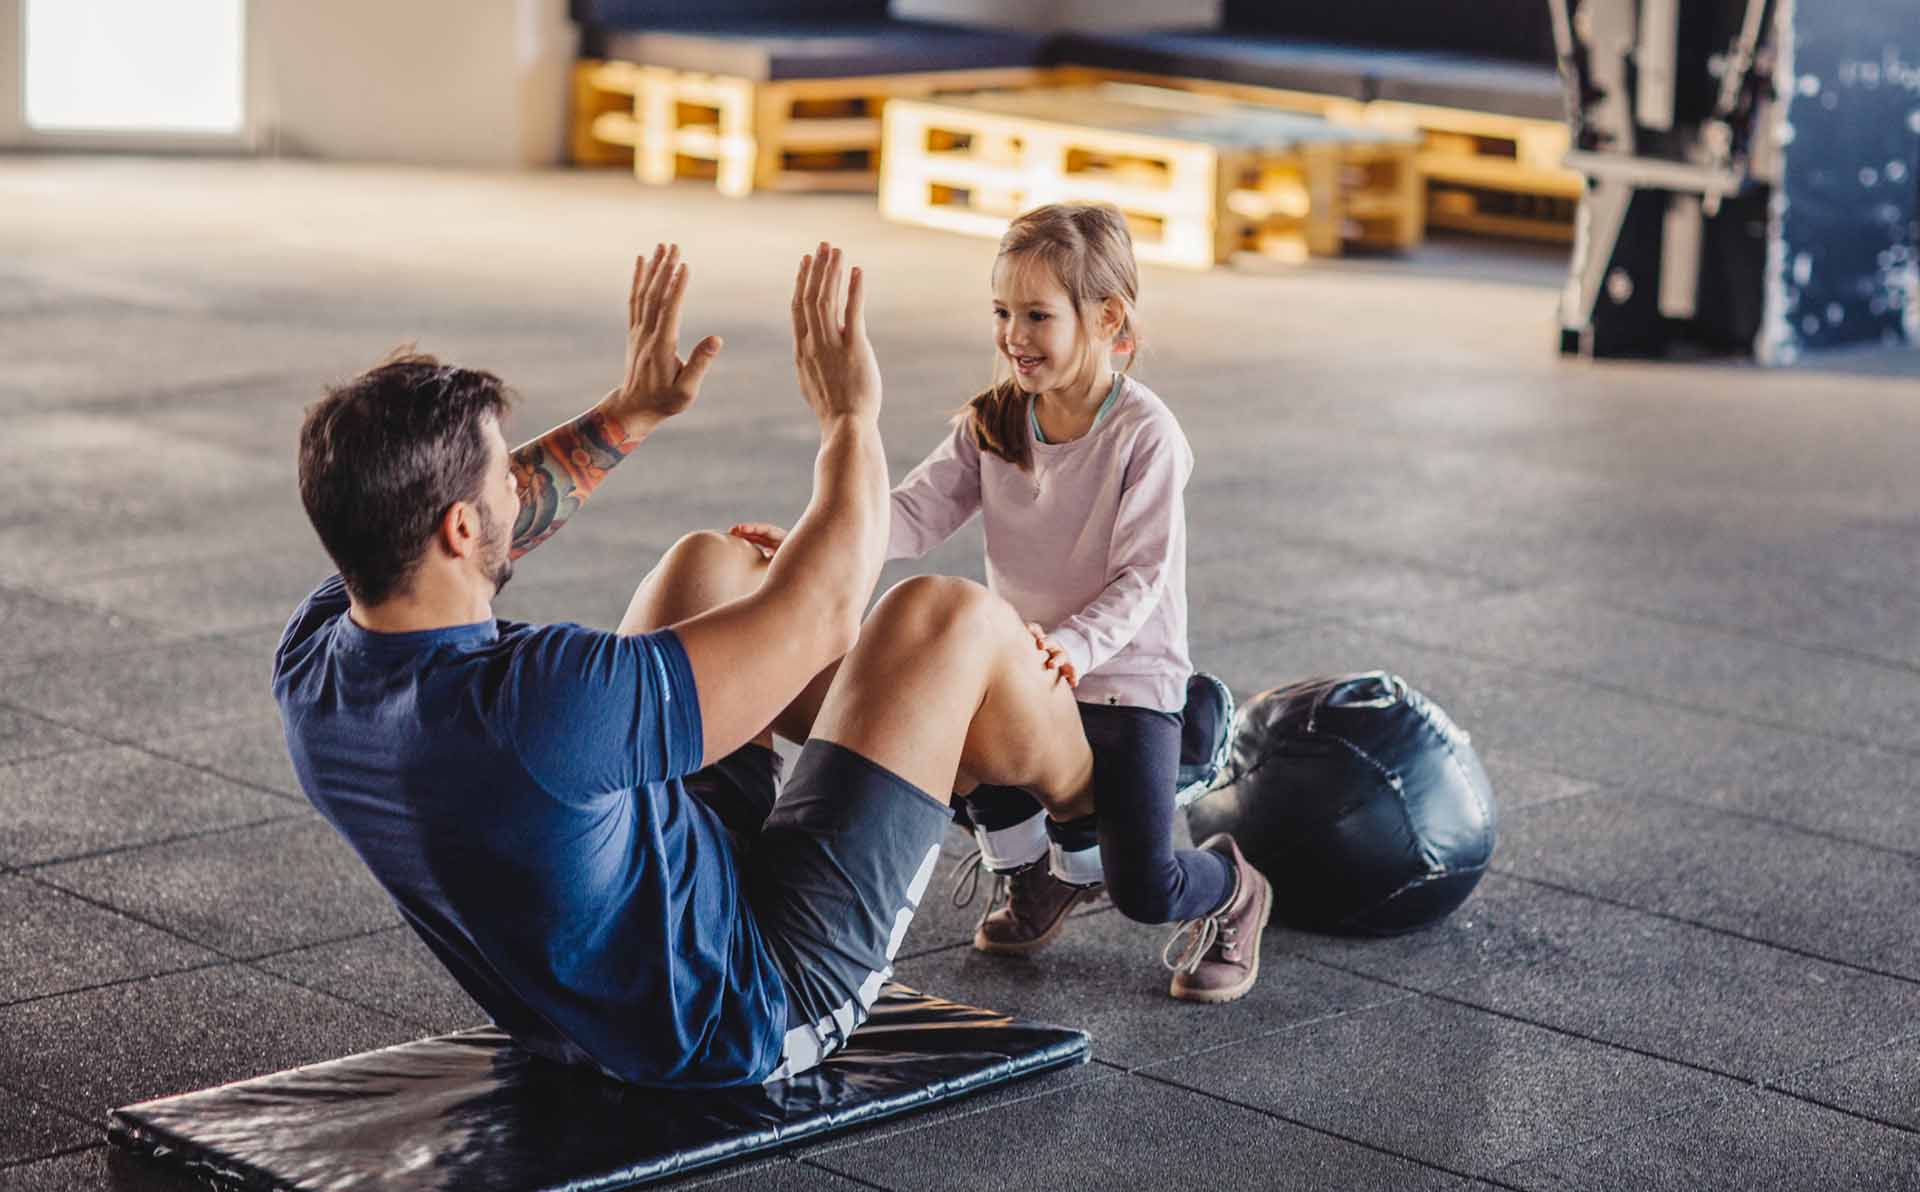 Father doing sit-ups with daughter sitting on his legs . They are in gym, exercising together.